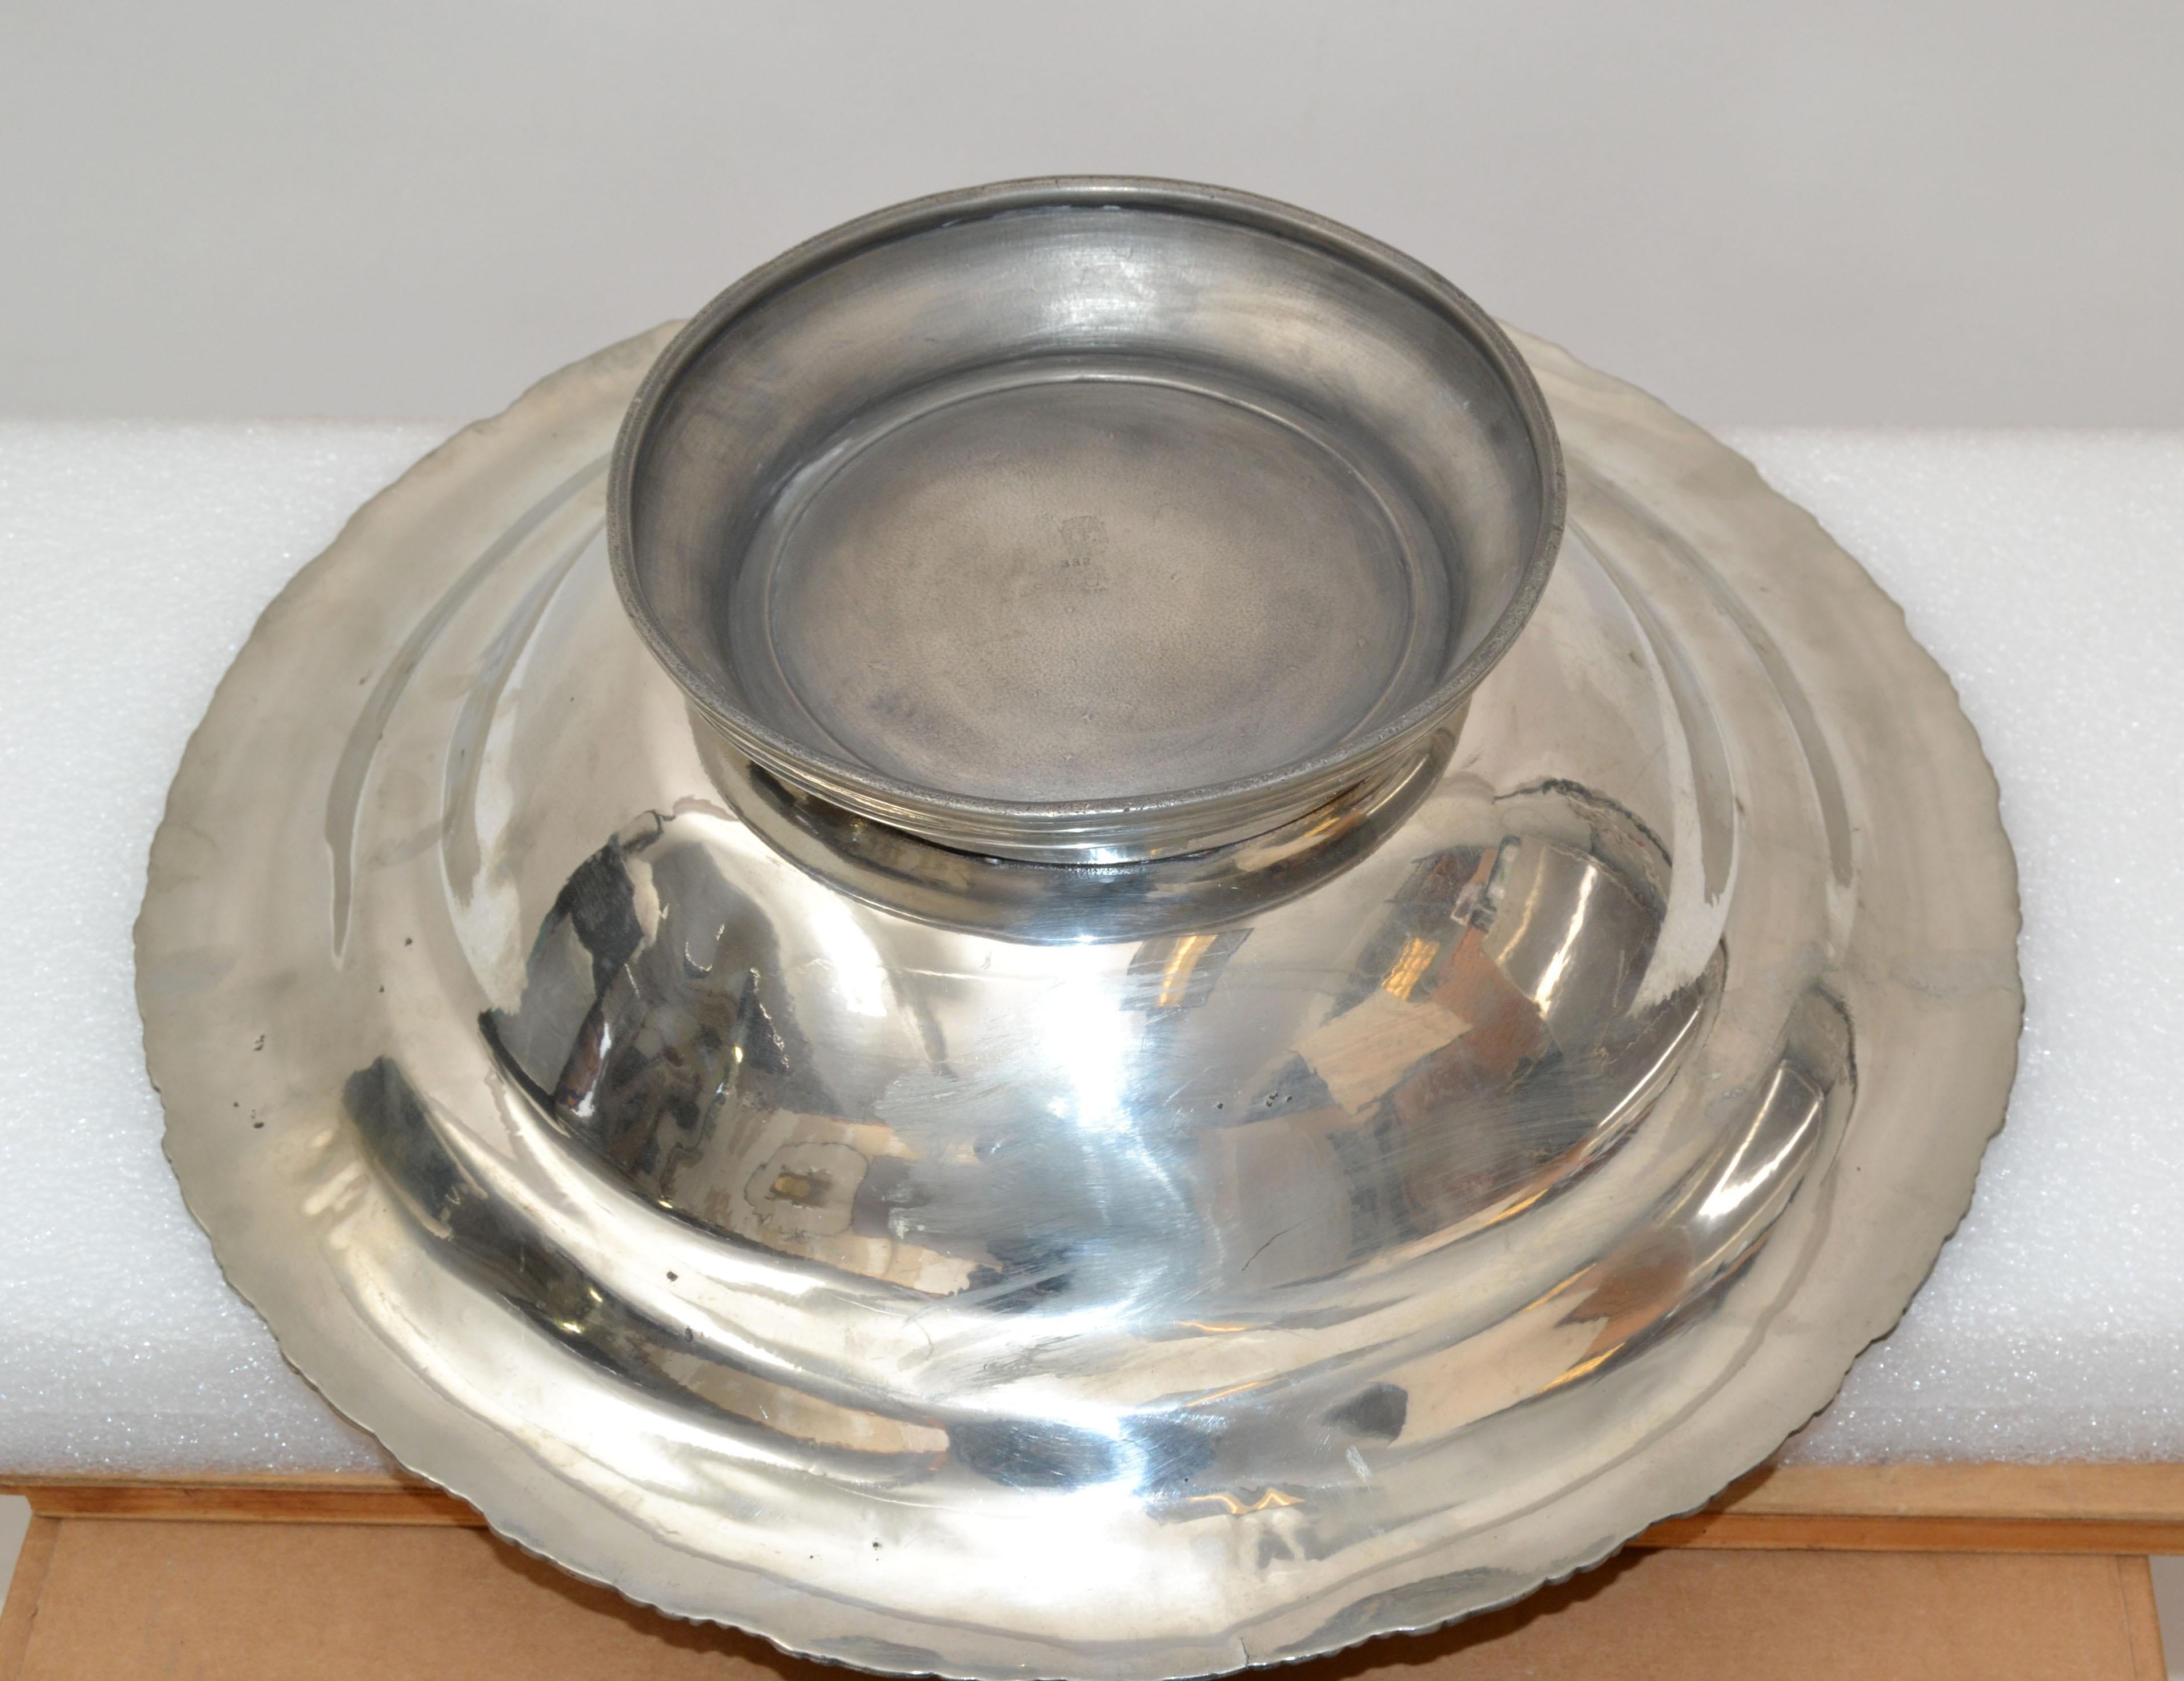 English Silver Plate Trademark Ornate Large Bowl Footed Serving Dish Punch Bowl im Angebot 3